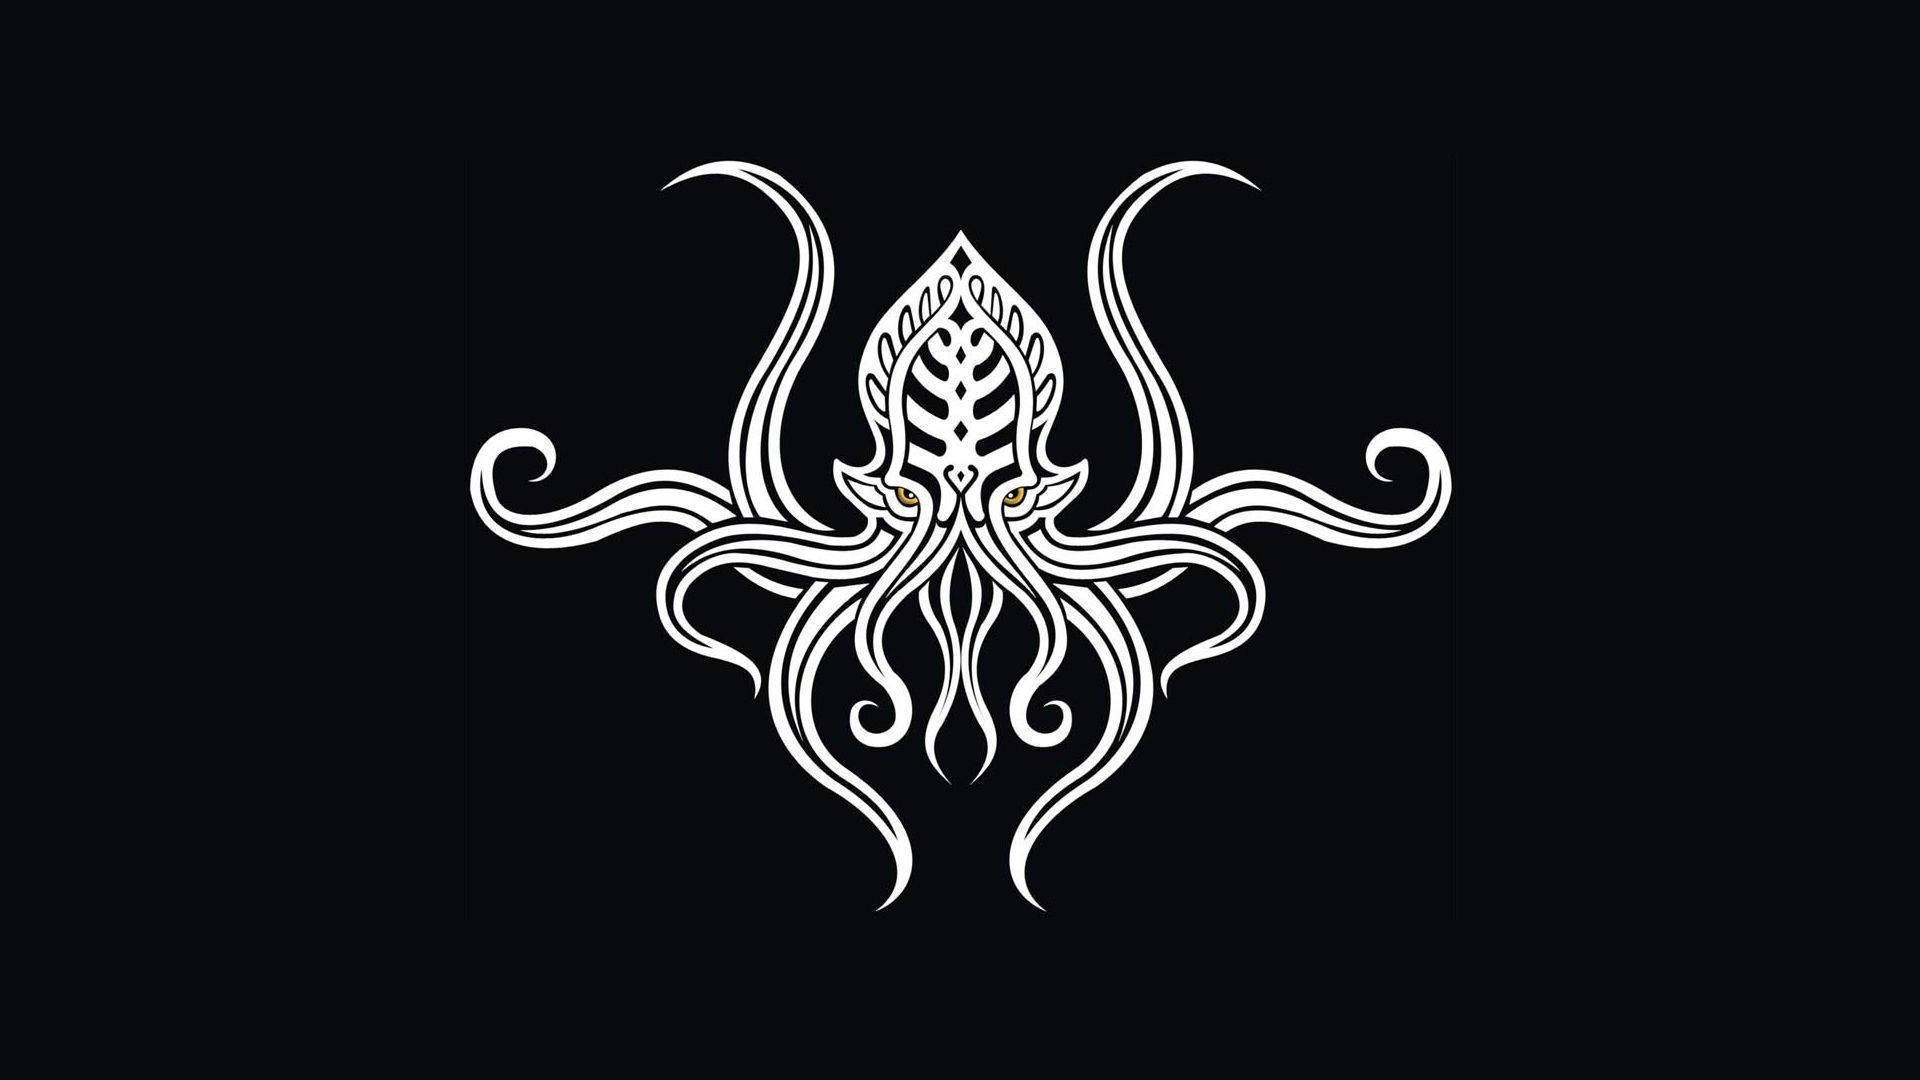 "The Symbol of Cthulhu" Wallpaper